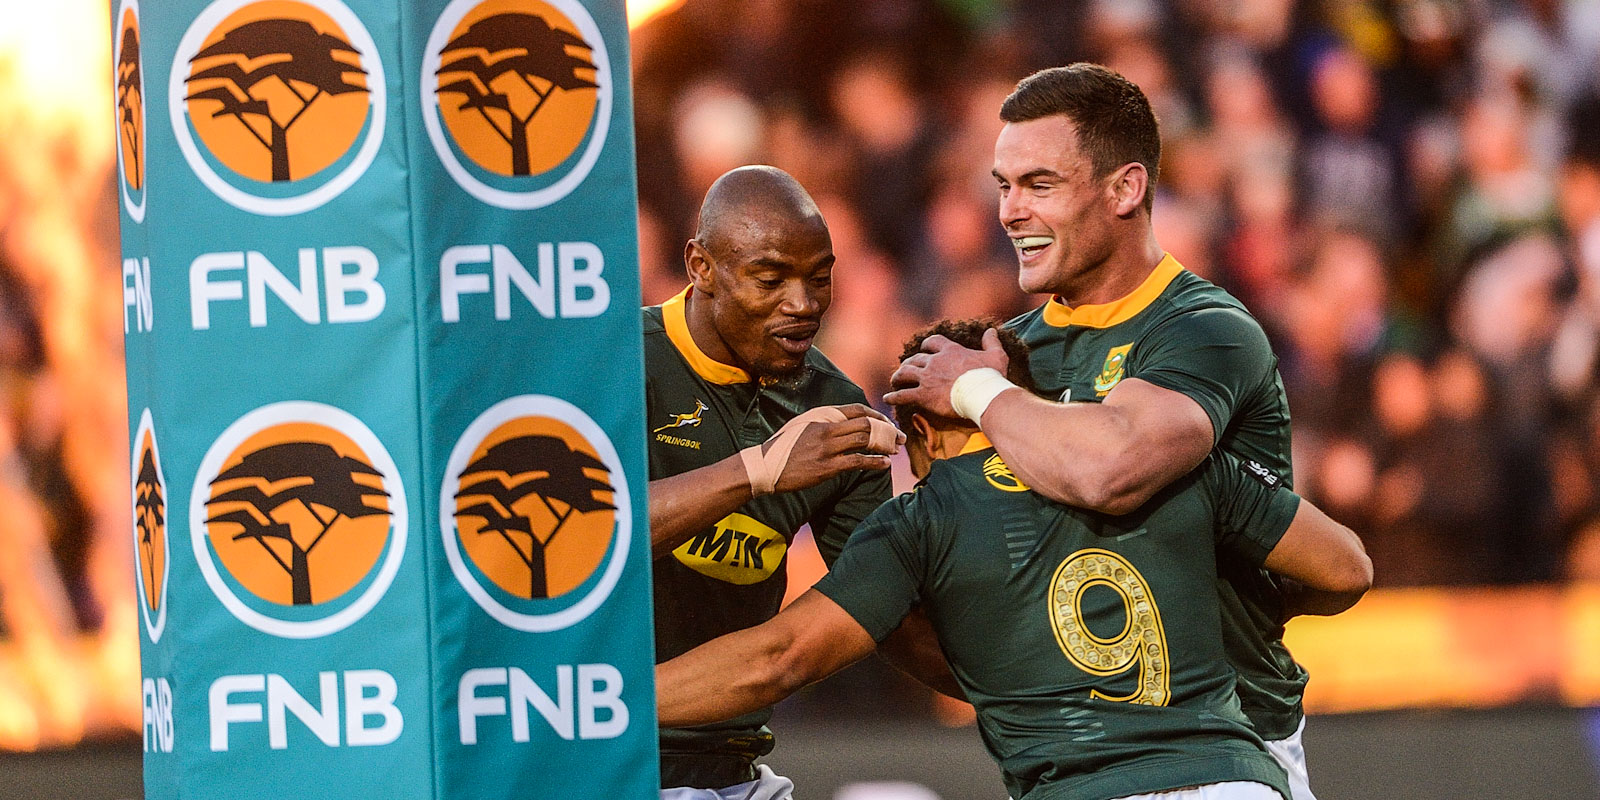 Jesse Kriel and Makazole Mapimpi congratulate Herschel Jantjies on his first Test try in 2019.